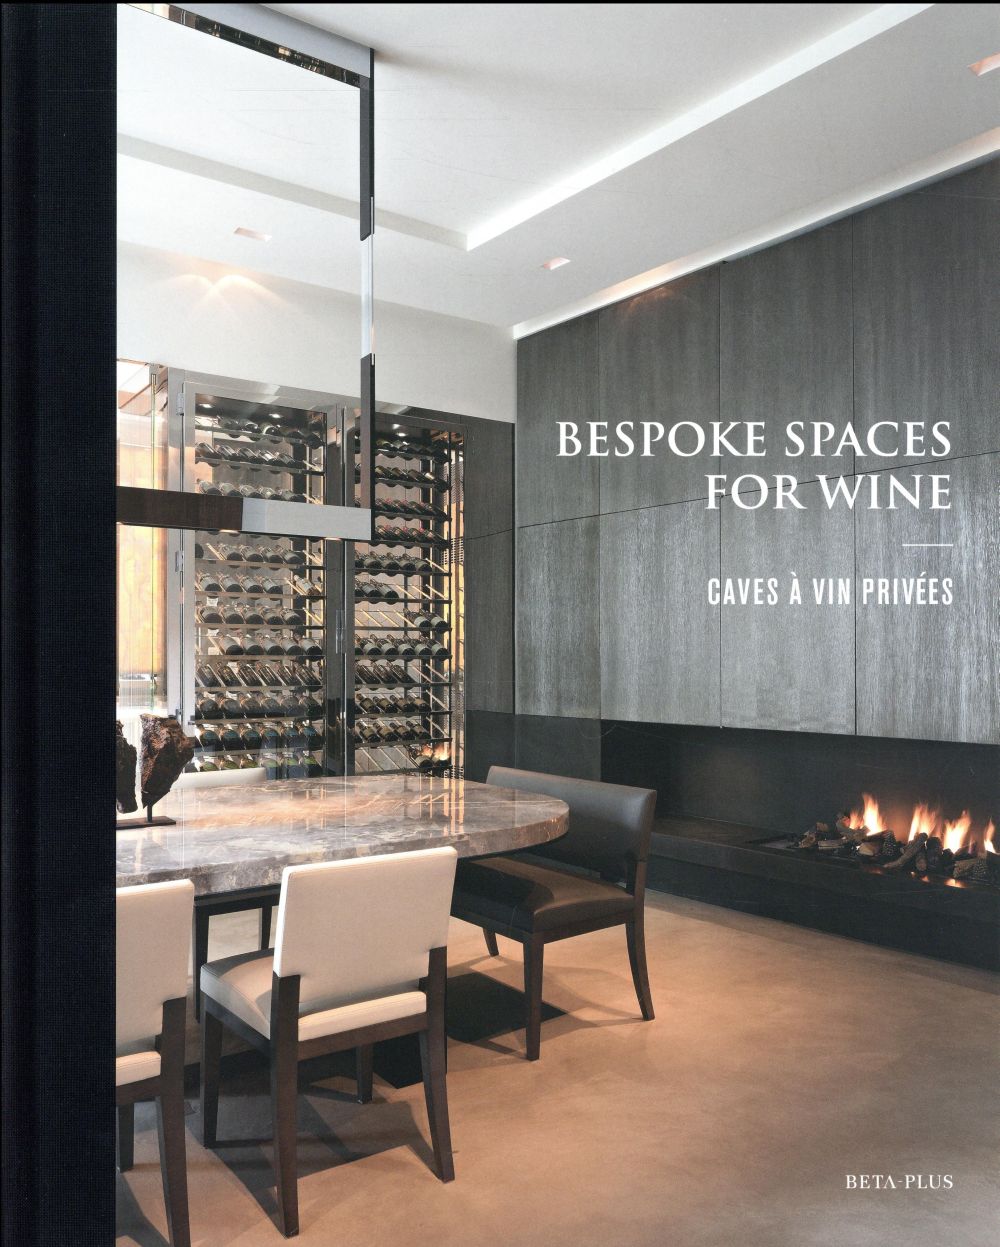 BESPOKE SPACES FOR WINE - CAVES A VIN PRIVEES